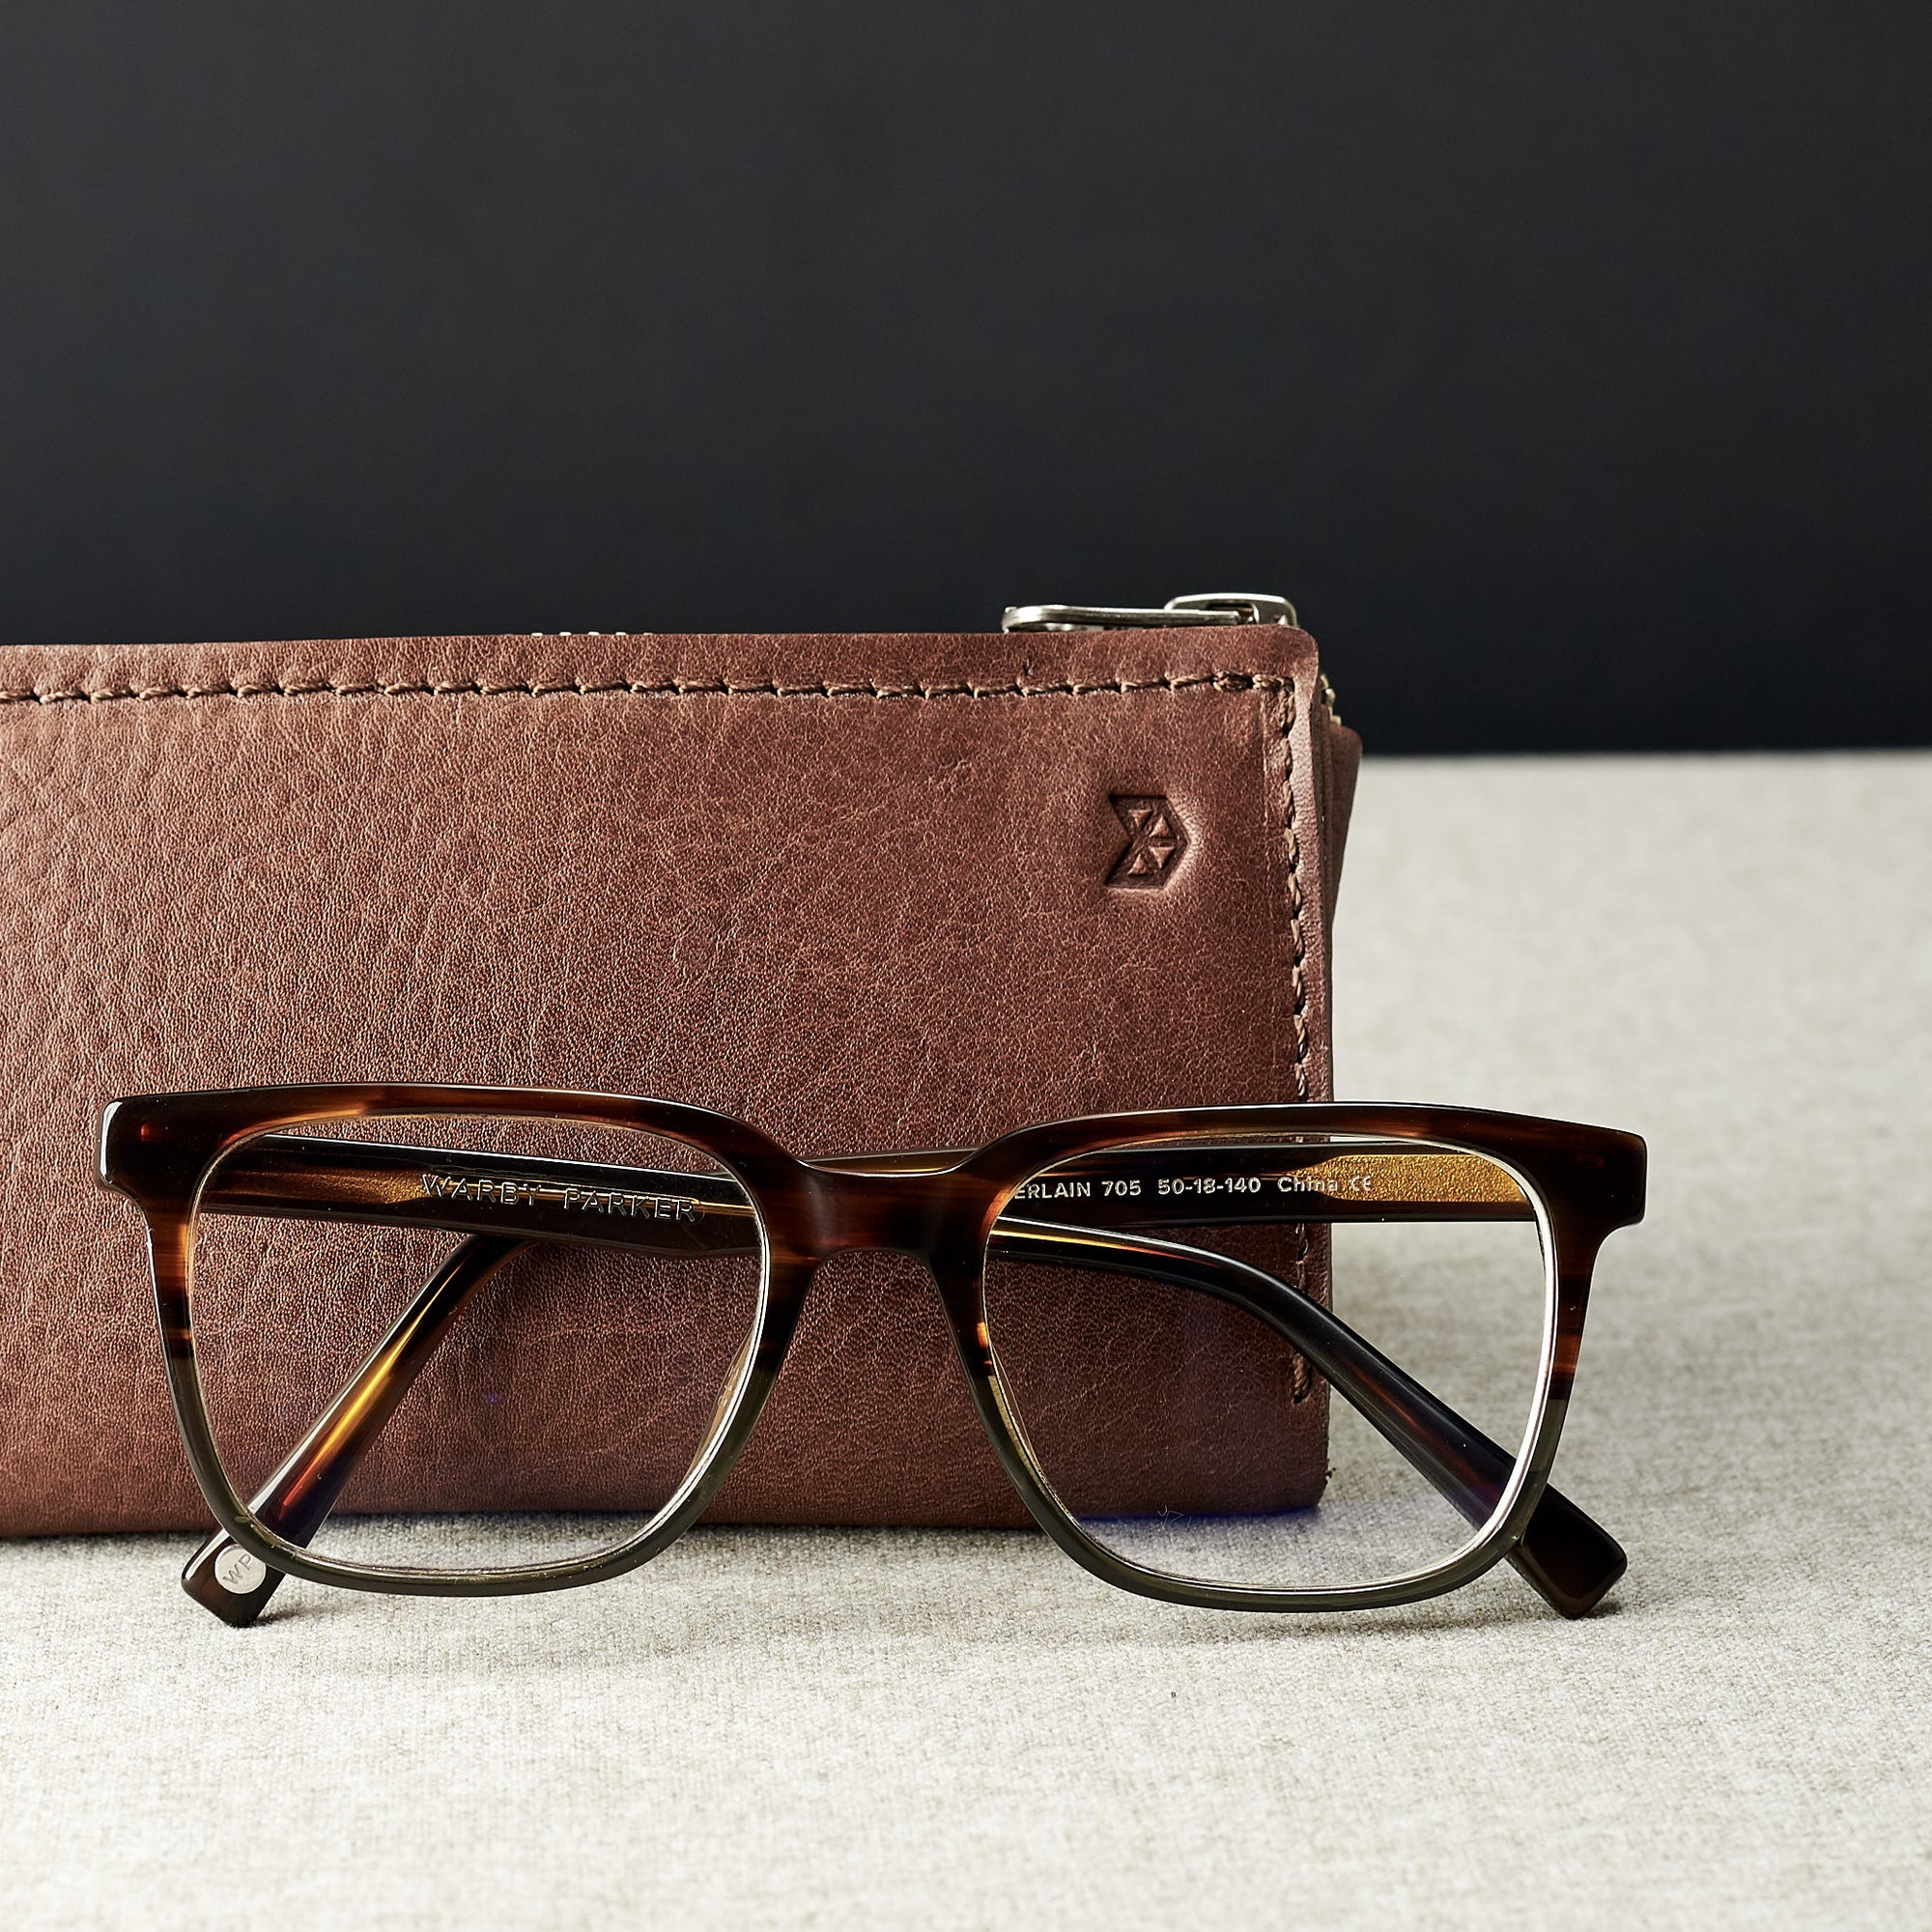 Style photo. Brown leather glasses case for men. Eyewear mens leather cases